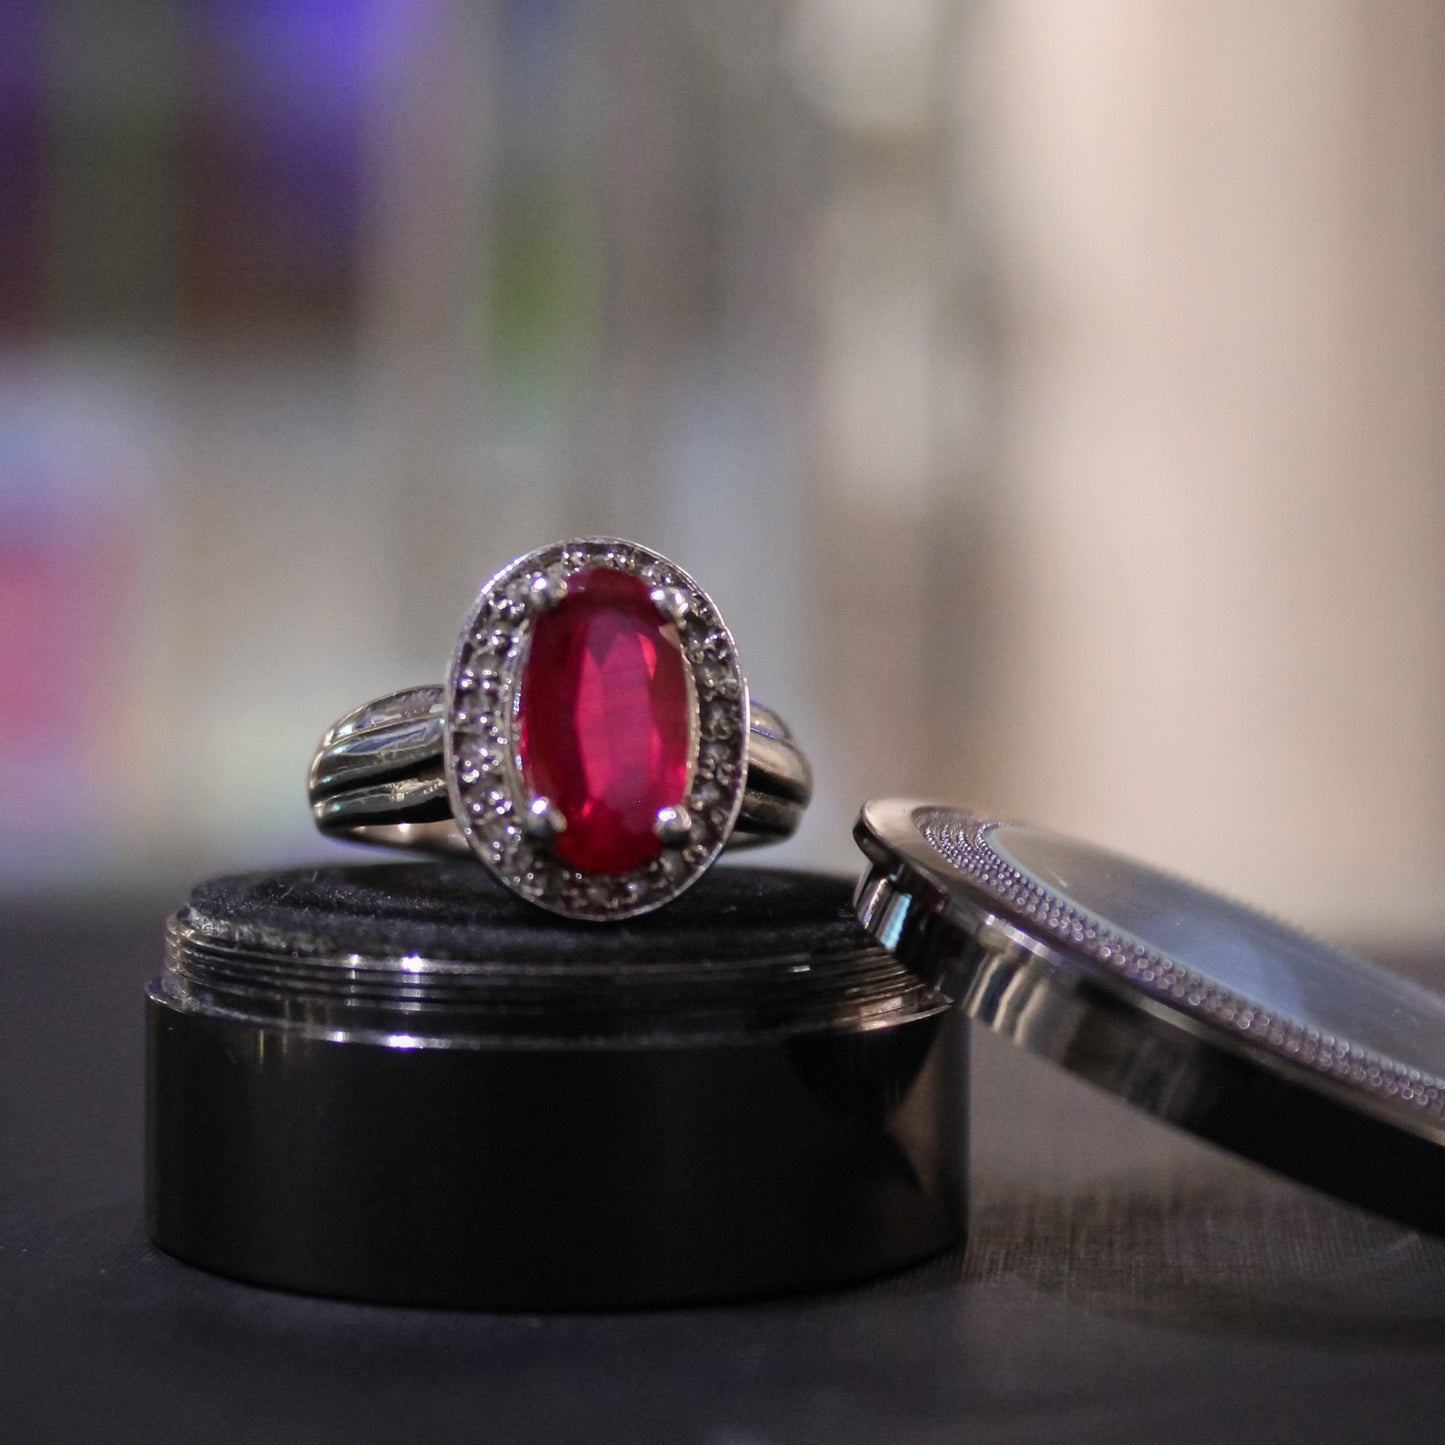 Buy South African Ruby Ring for Women's